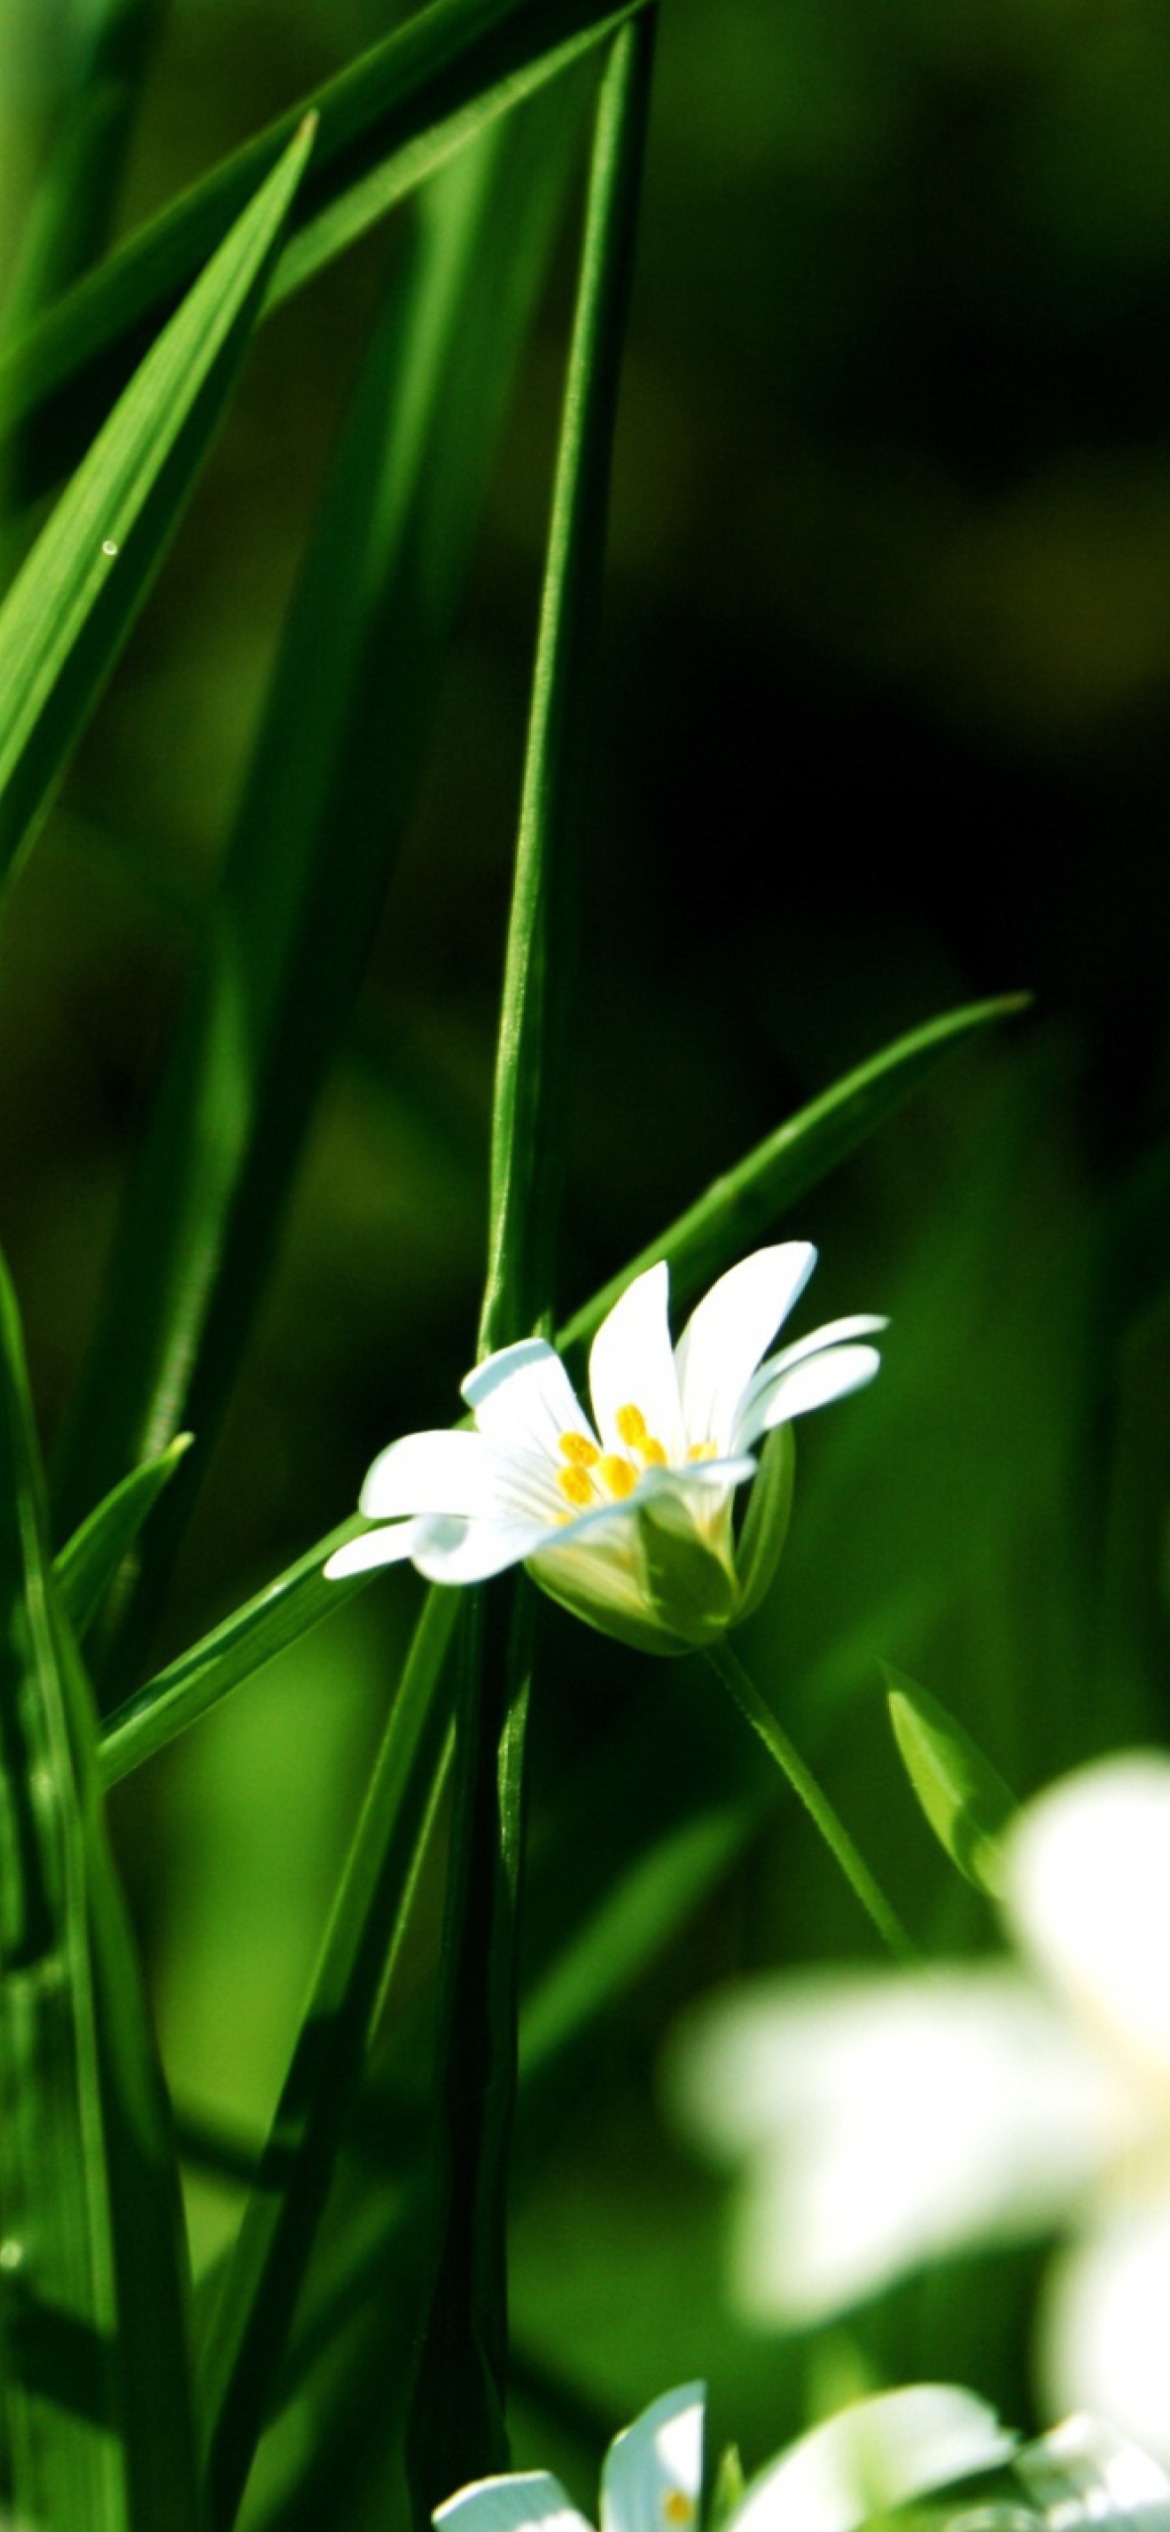 Grass And White Flowers wallpaper 1170x2532